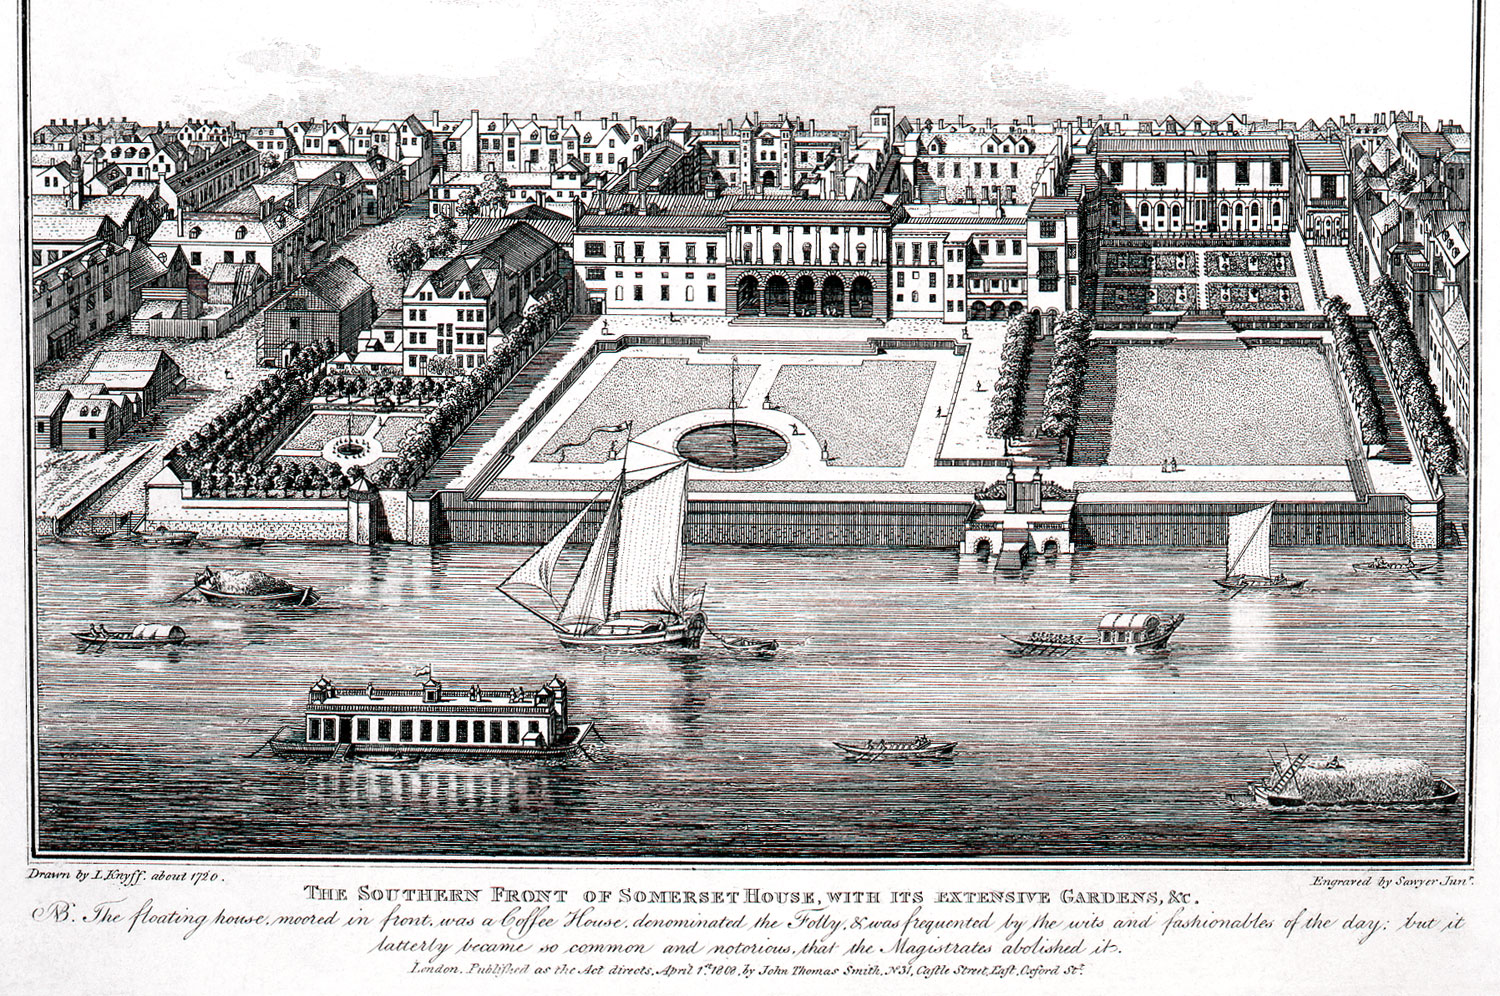 Illustration of Somerset House next to the Thames, showing a central block with a garden courtyard in front of it.